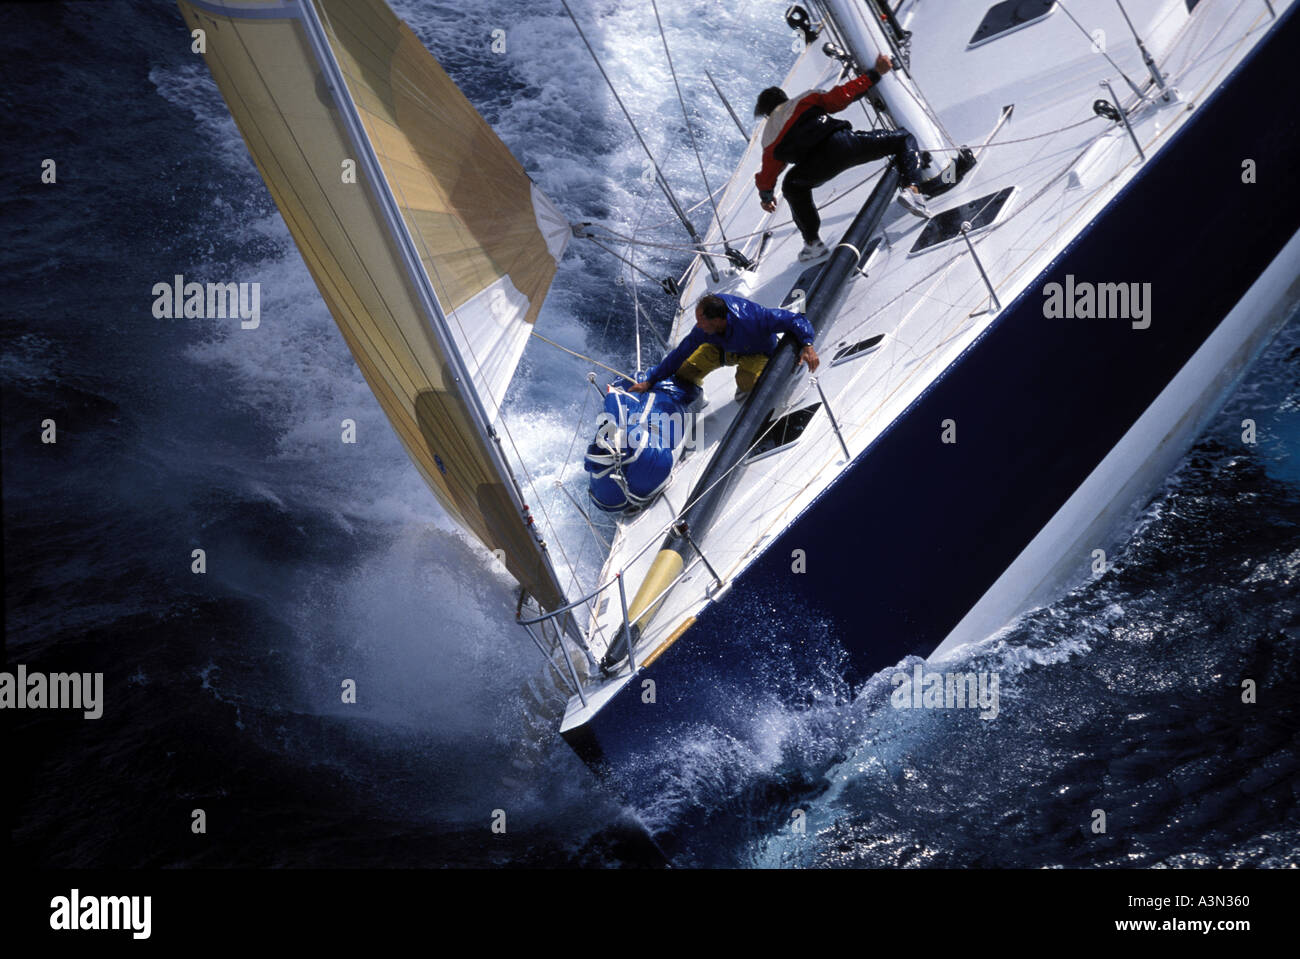 Two crew members of the foredeck of a maxi yacht in rough seas Stock Photo